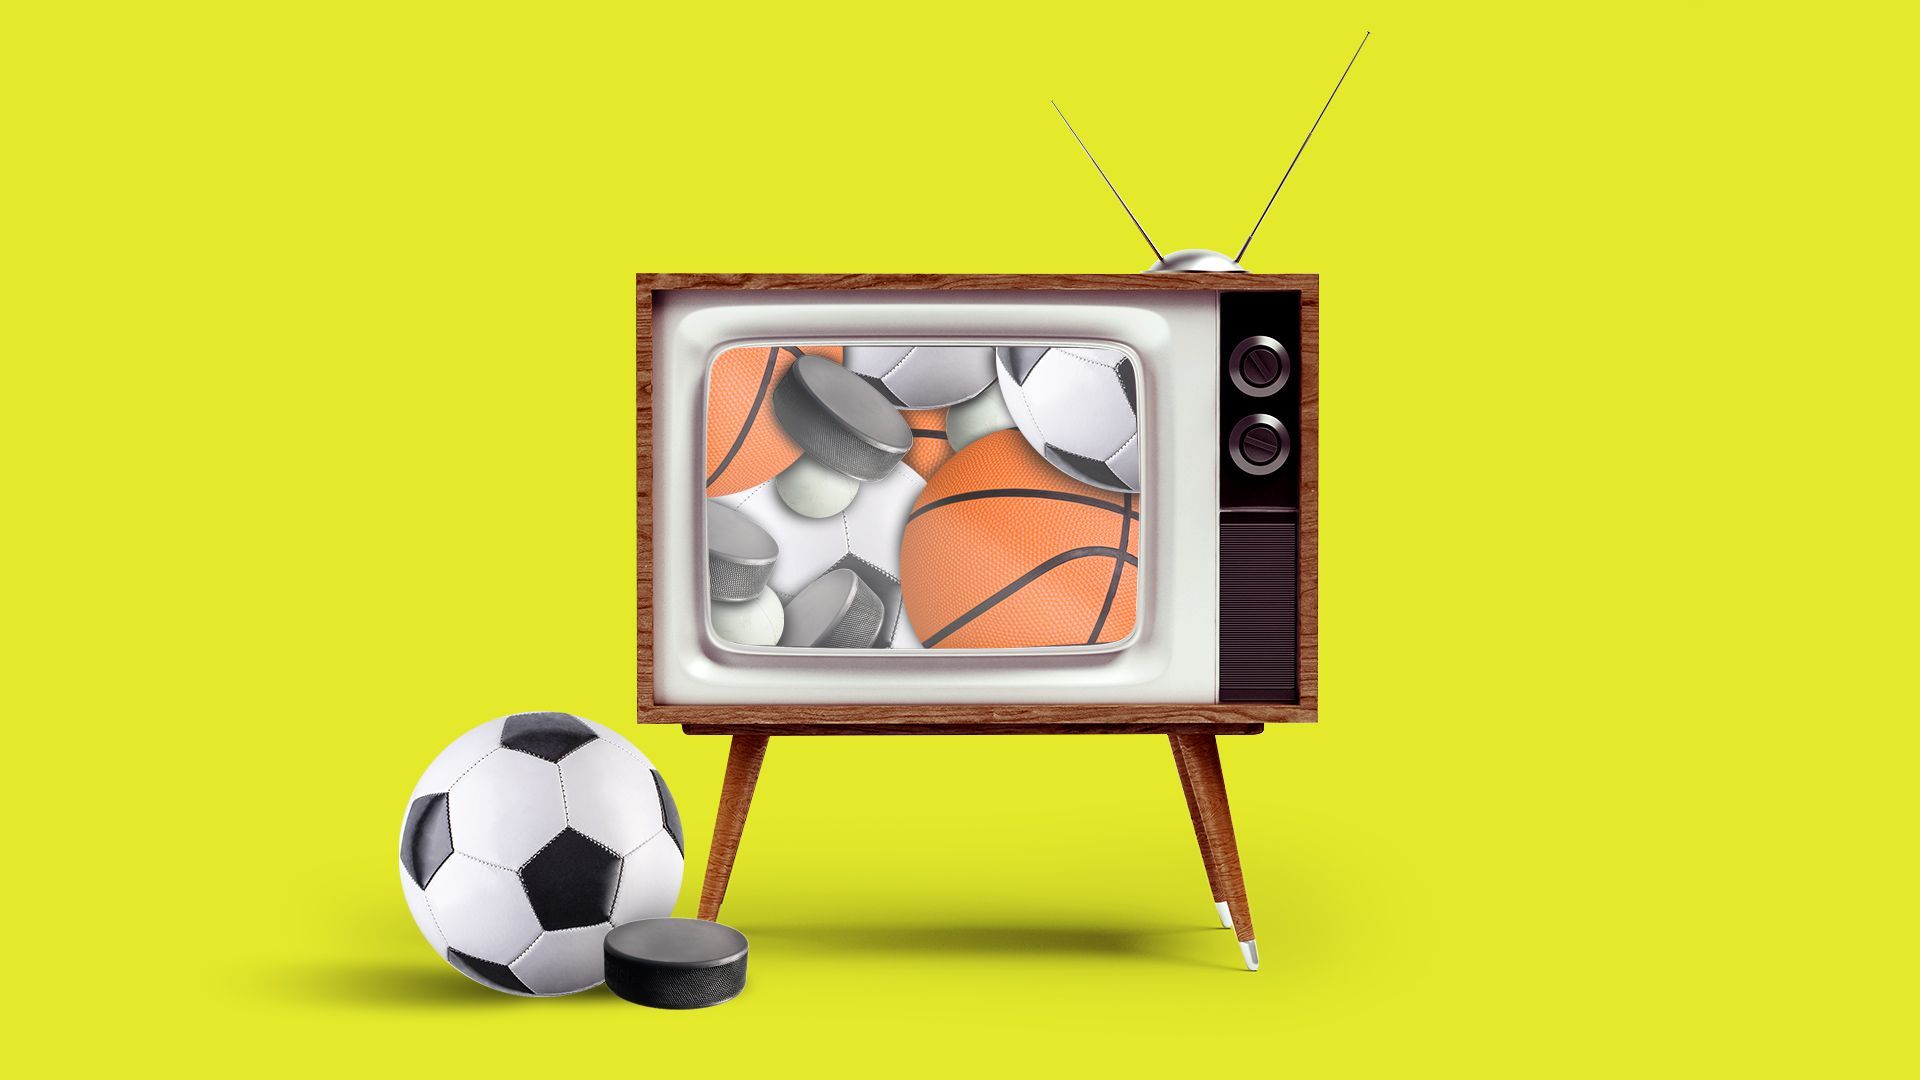 Illustration of a television with soccer balls, basketballs, hockey pucks and lacrosse balls jammed inside. 